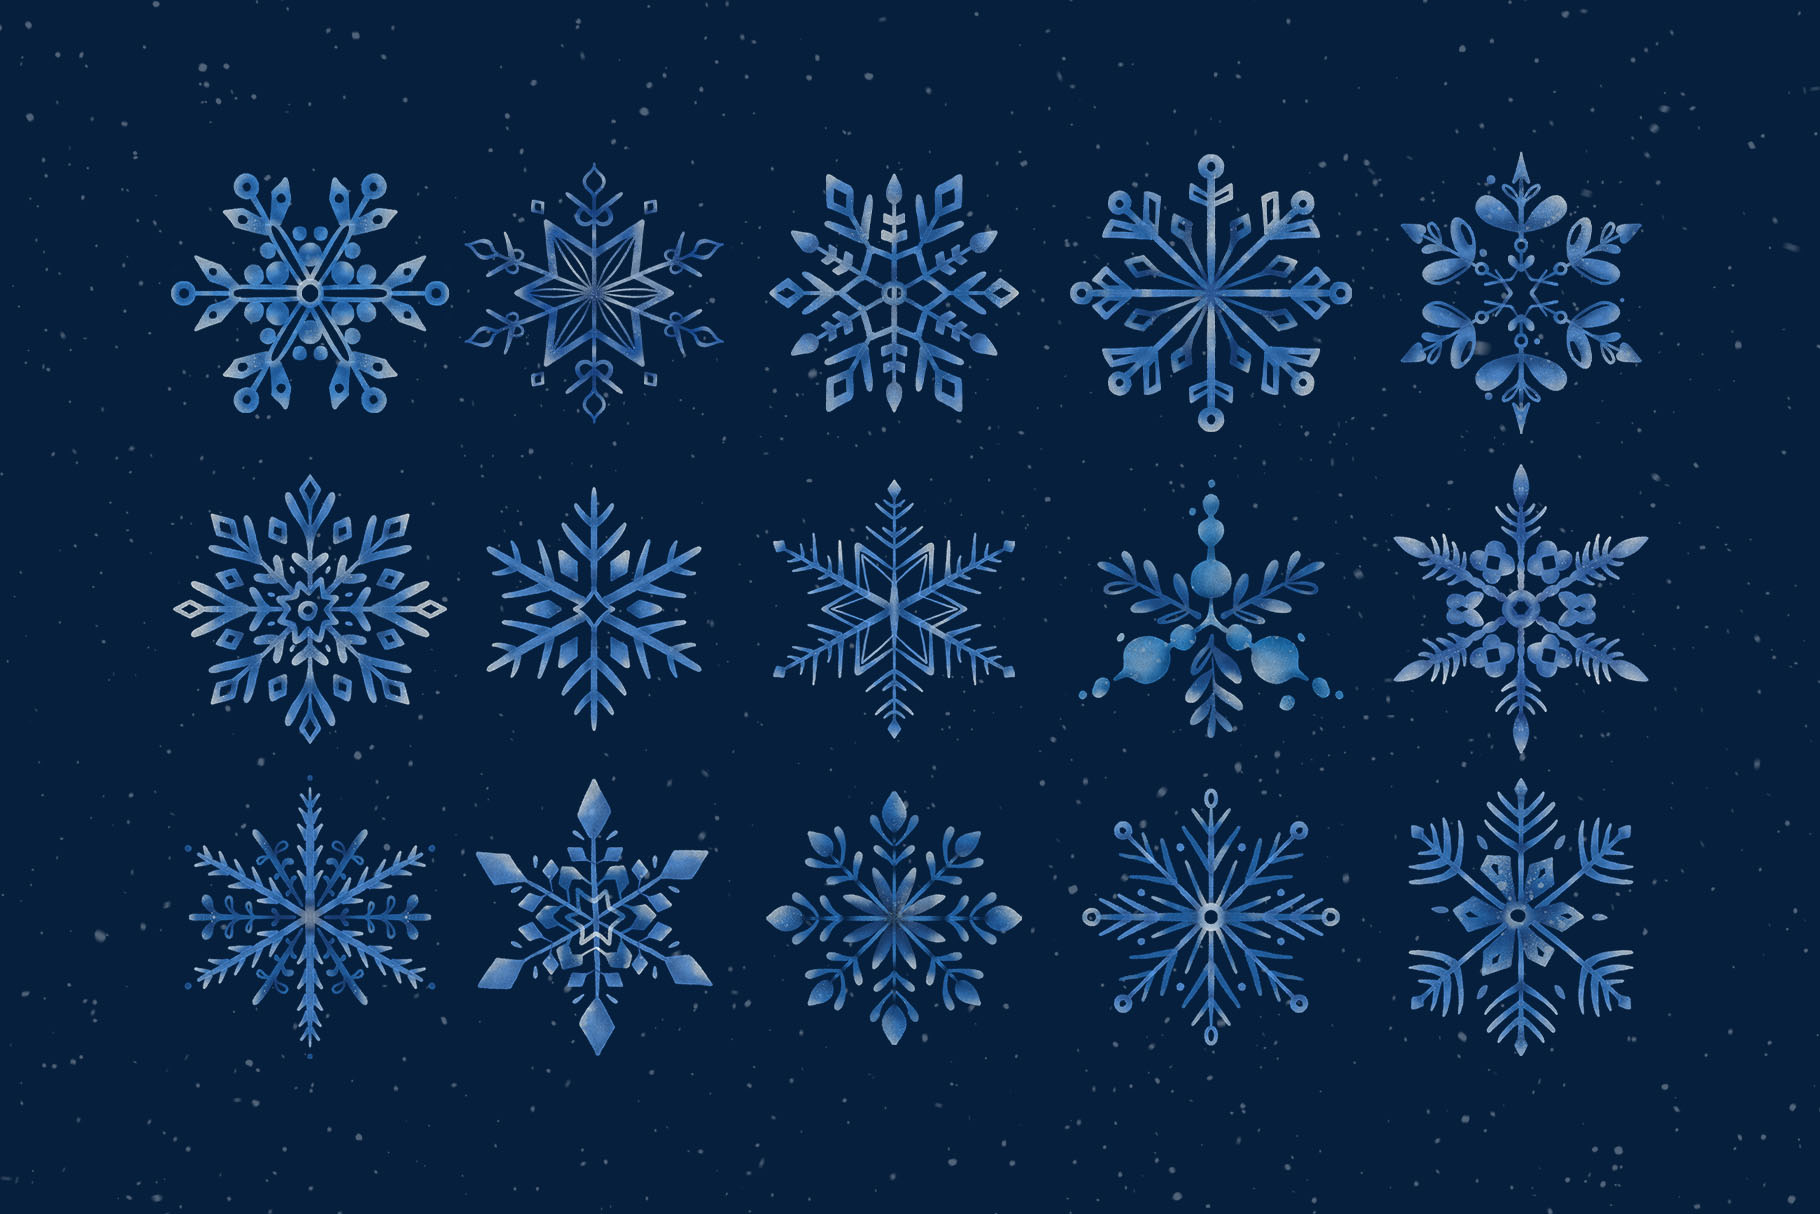 Snowflake Clipart Illustrations (PSD, PNG Format)